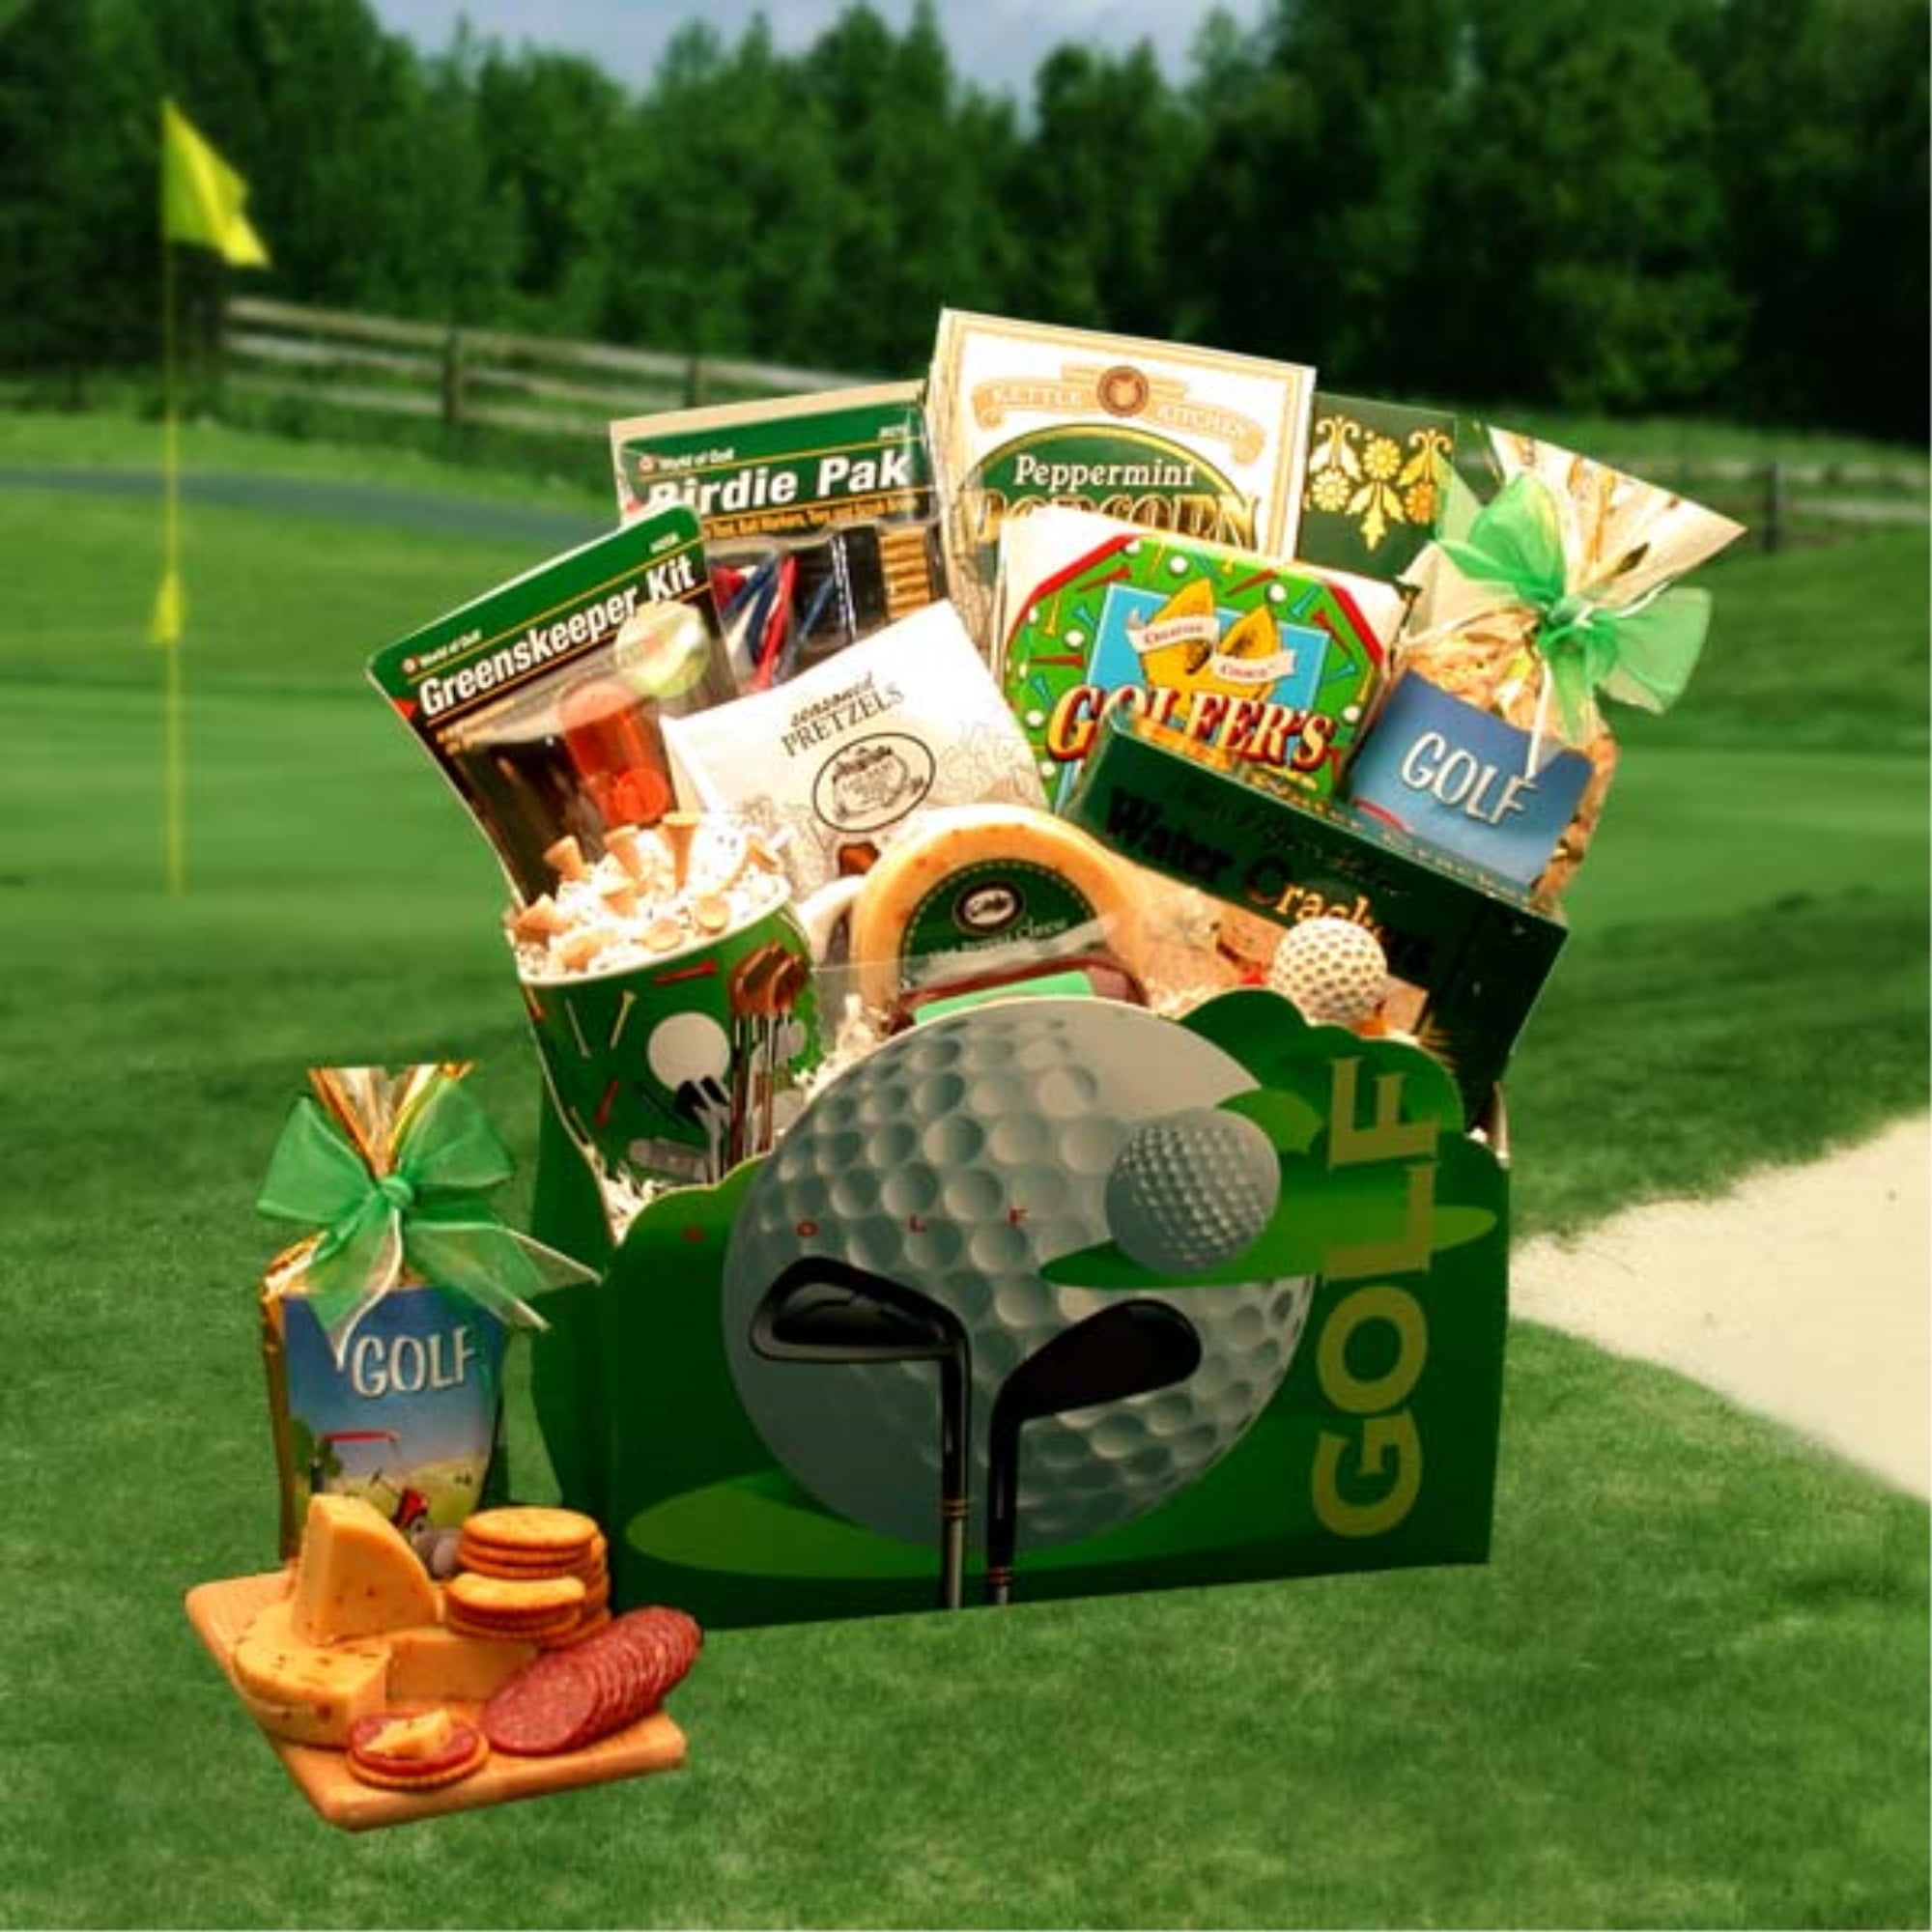 Organic Stores Golf Gift: for The Love of Golf Gift Basket -Large